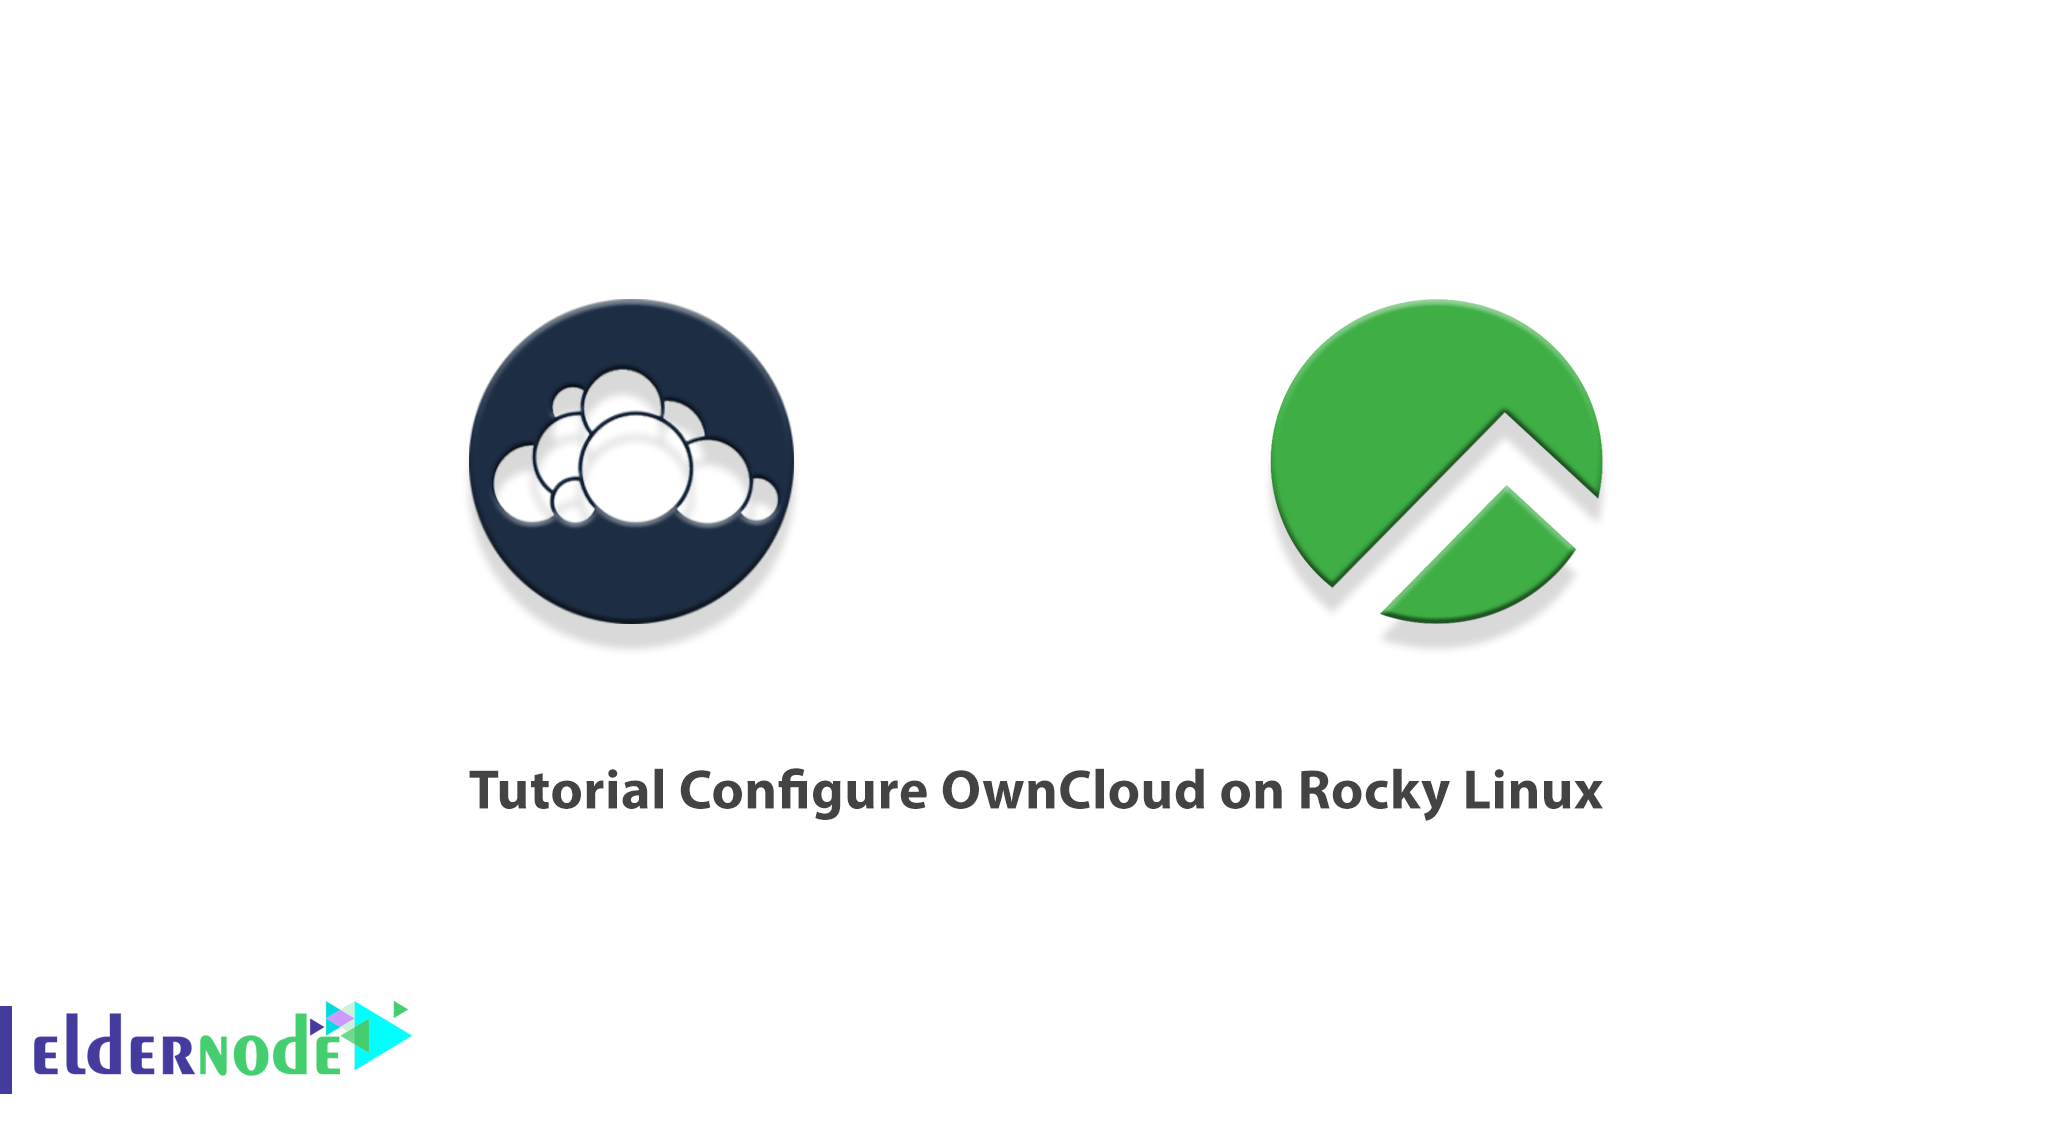 Tutorial Configure OwnCloud on Rocky Linux